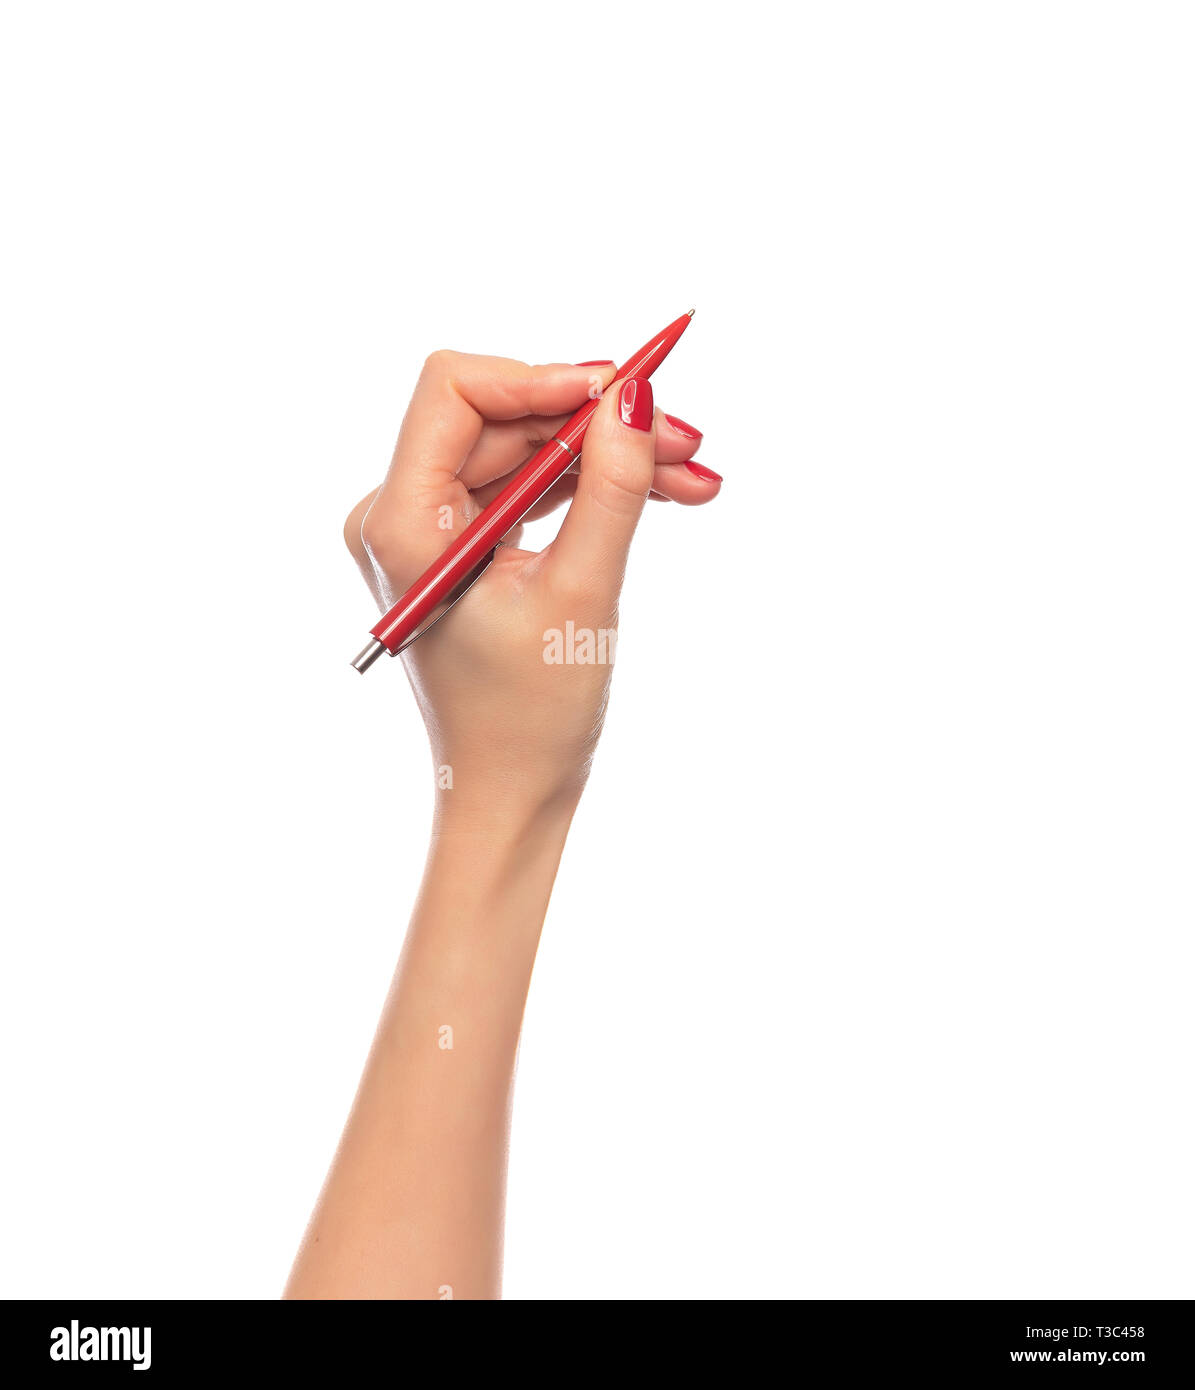 Female hand holding a pen on white background Stock Photo - Alamy